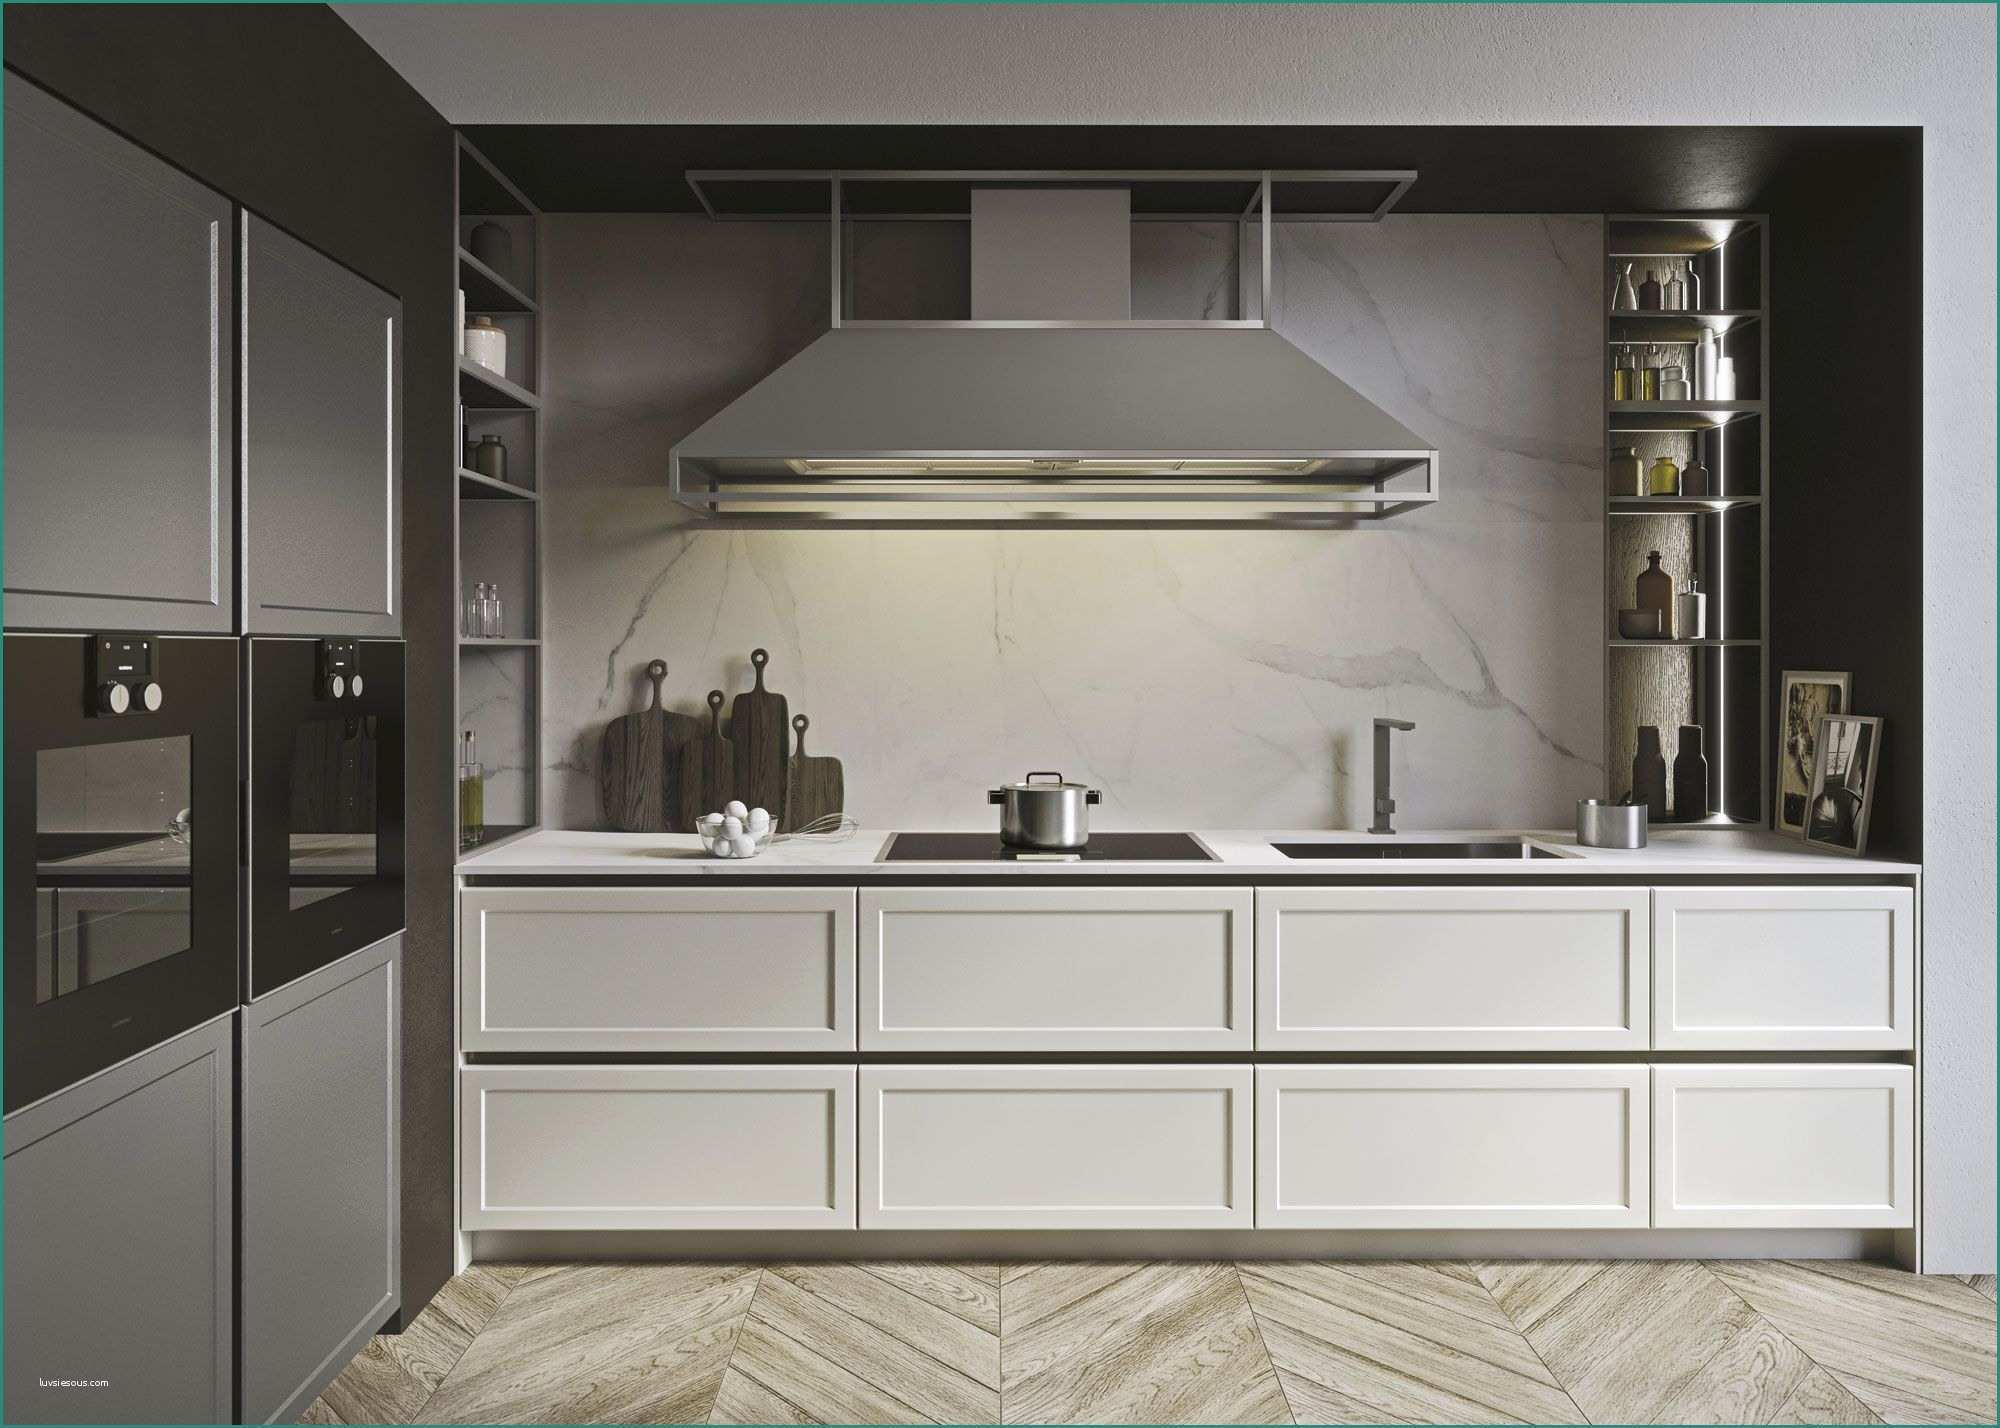 Snaidero Ola E the Visual Spaciousness and Lightness In the Kitchen Can Be Achieved